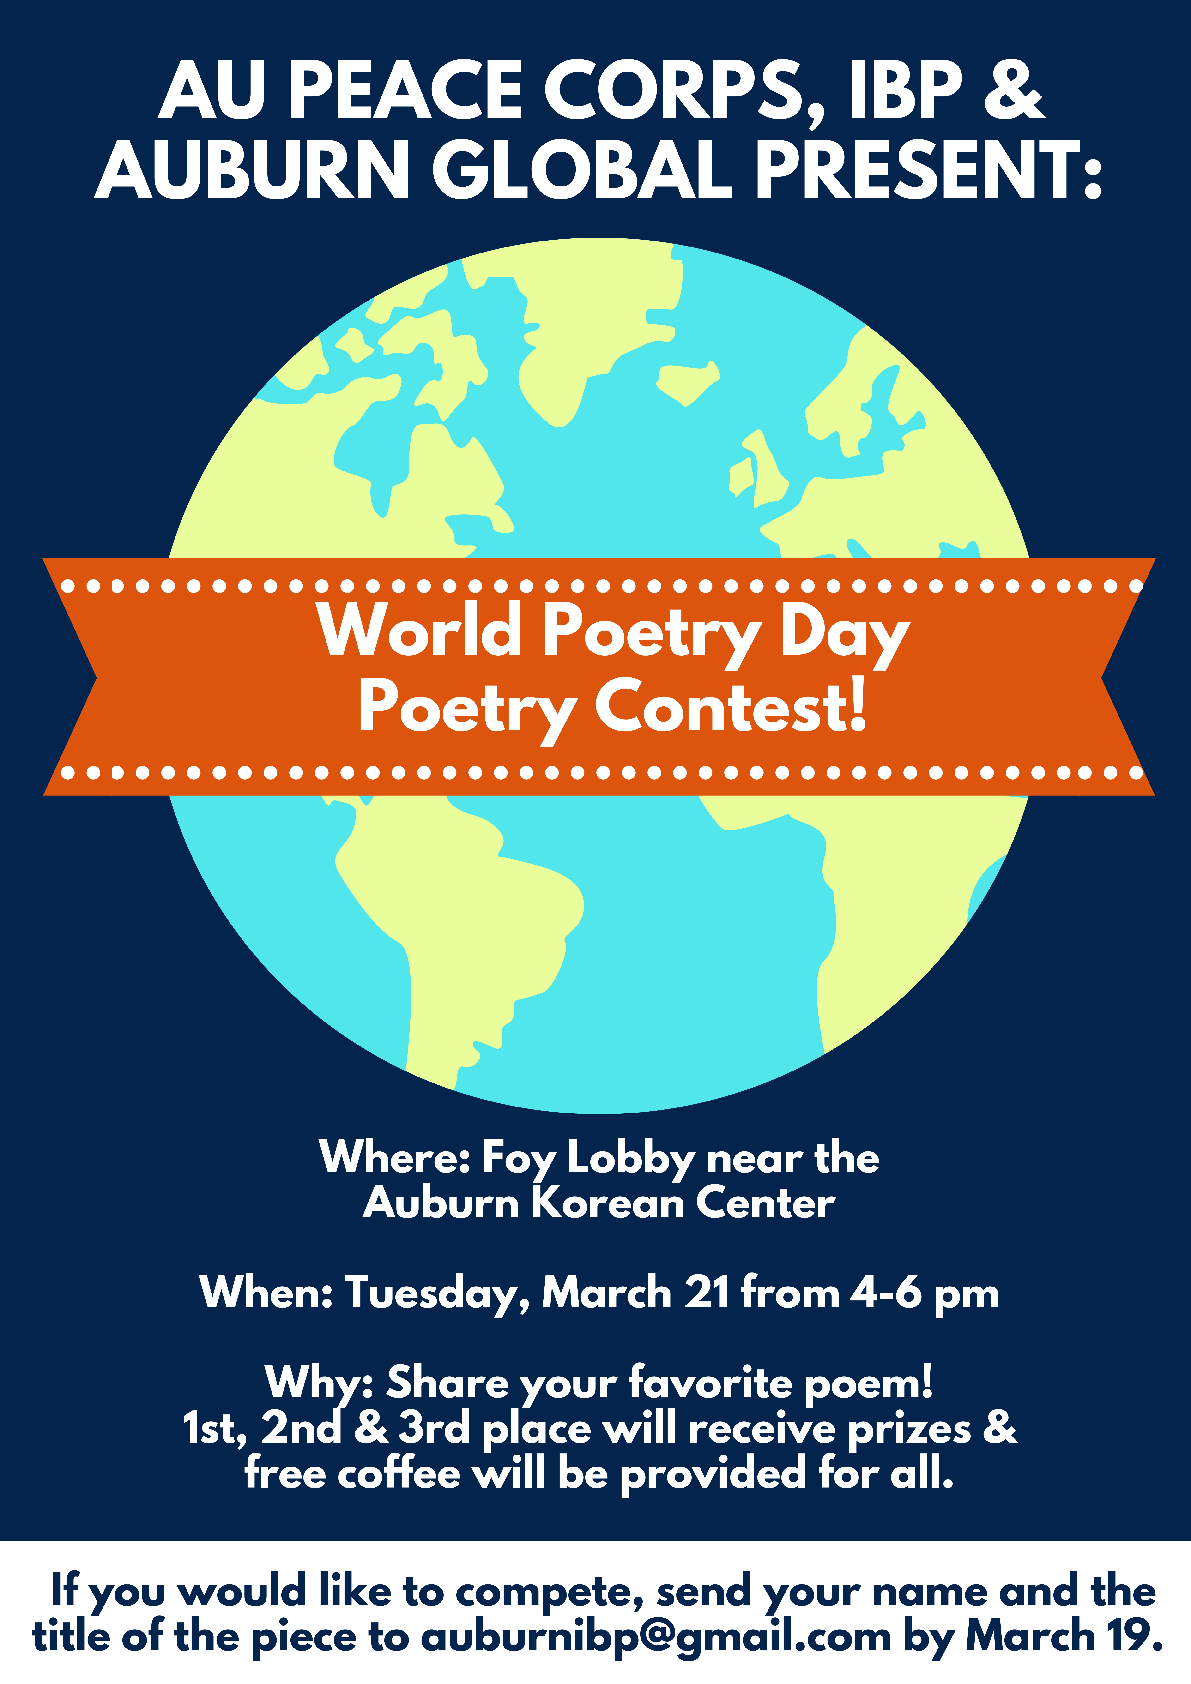 World Poetry Day Contest Info Graphic